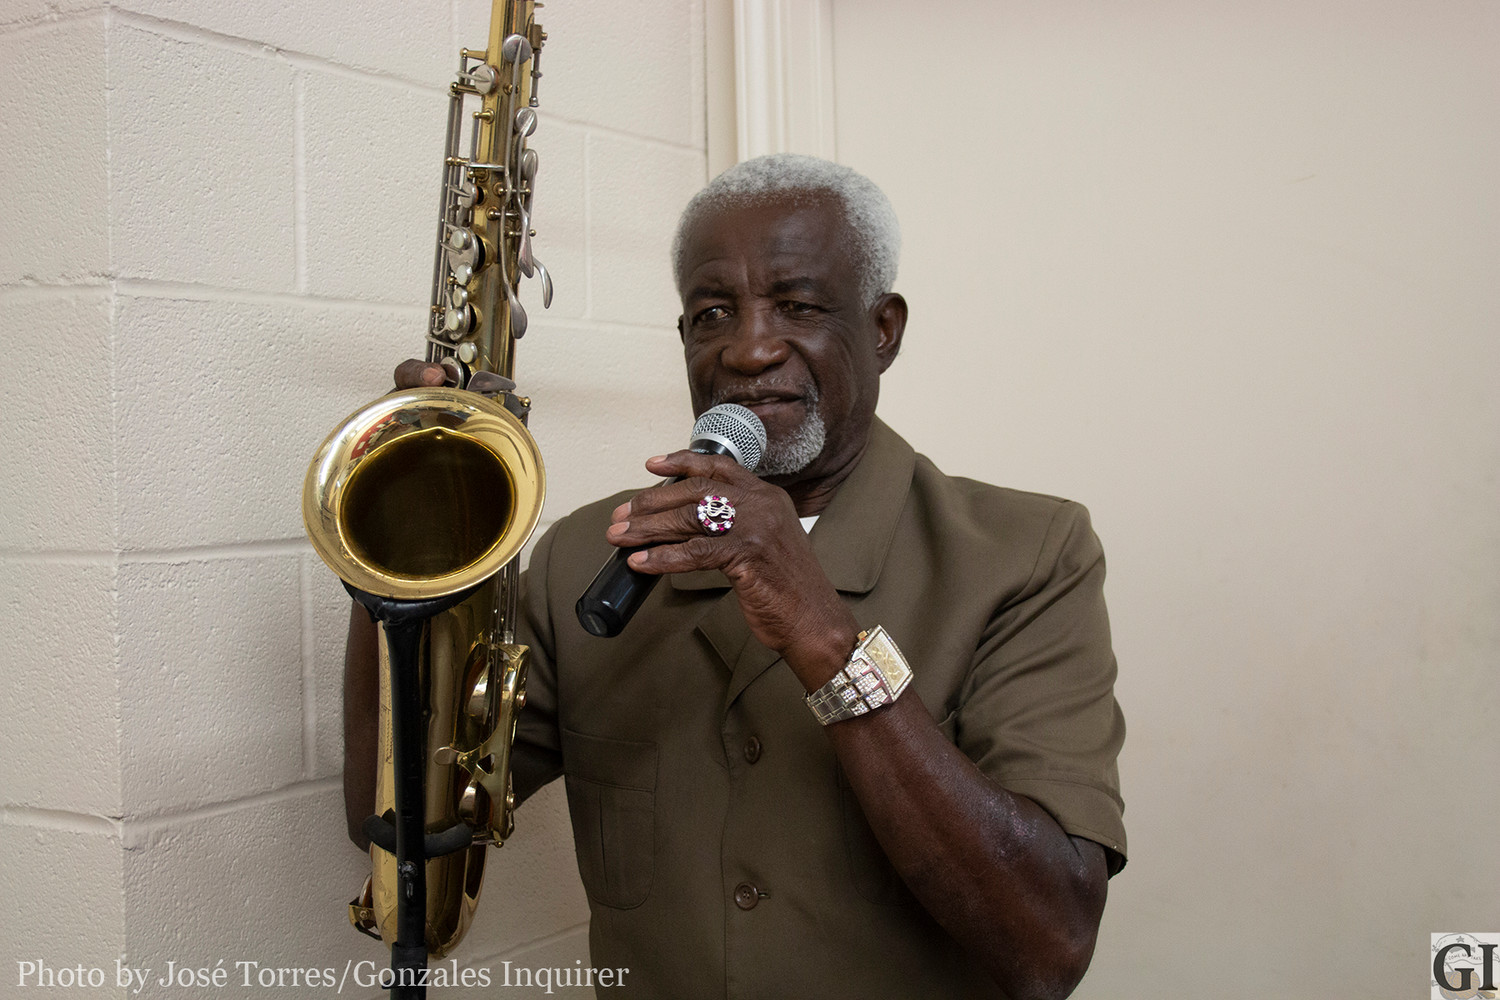 Legendary saxophone artist O.S. Grant will be performing the David Stewart Trucking Stage in Gonzales to kick off the Kenneth Stewart Trucking VIP Night at the Gonzales Inquirer’s Craft Beer Festival on Confederate Square.